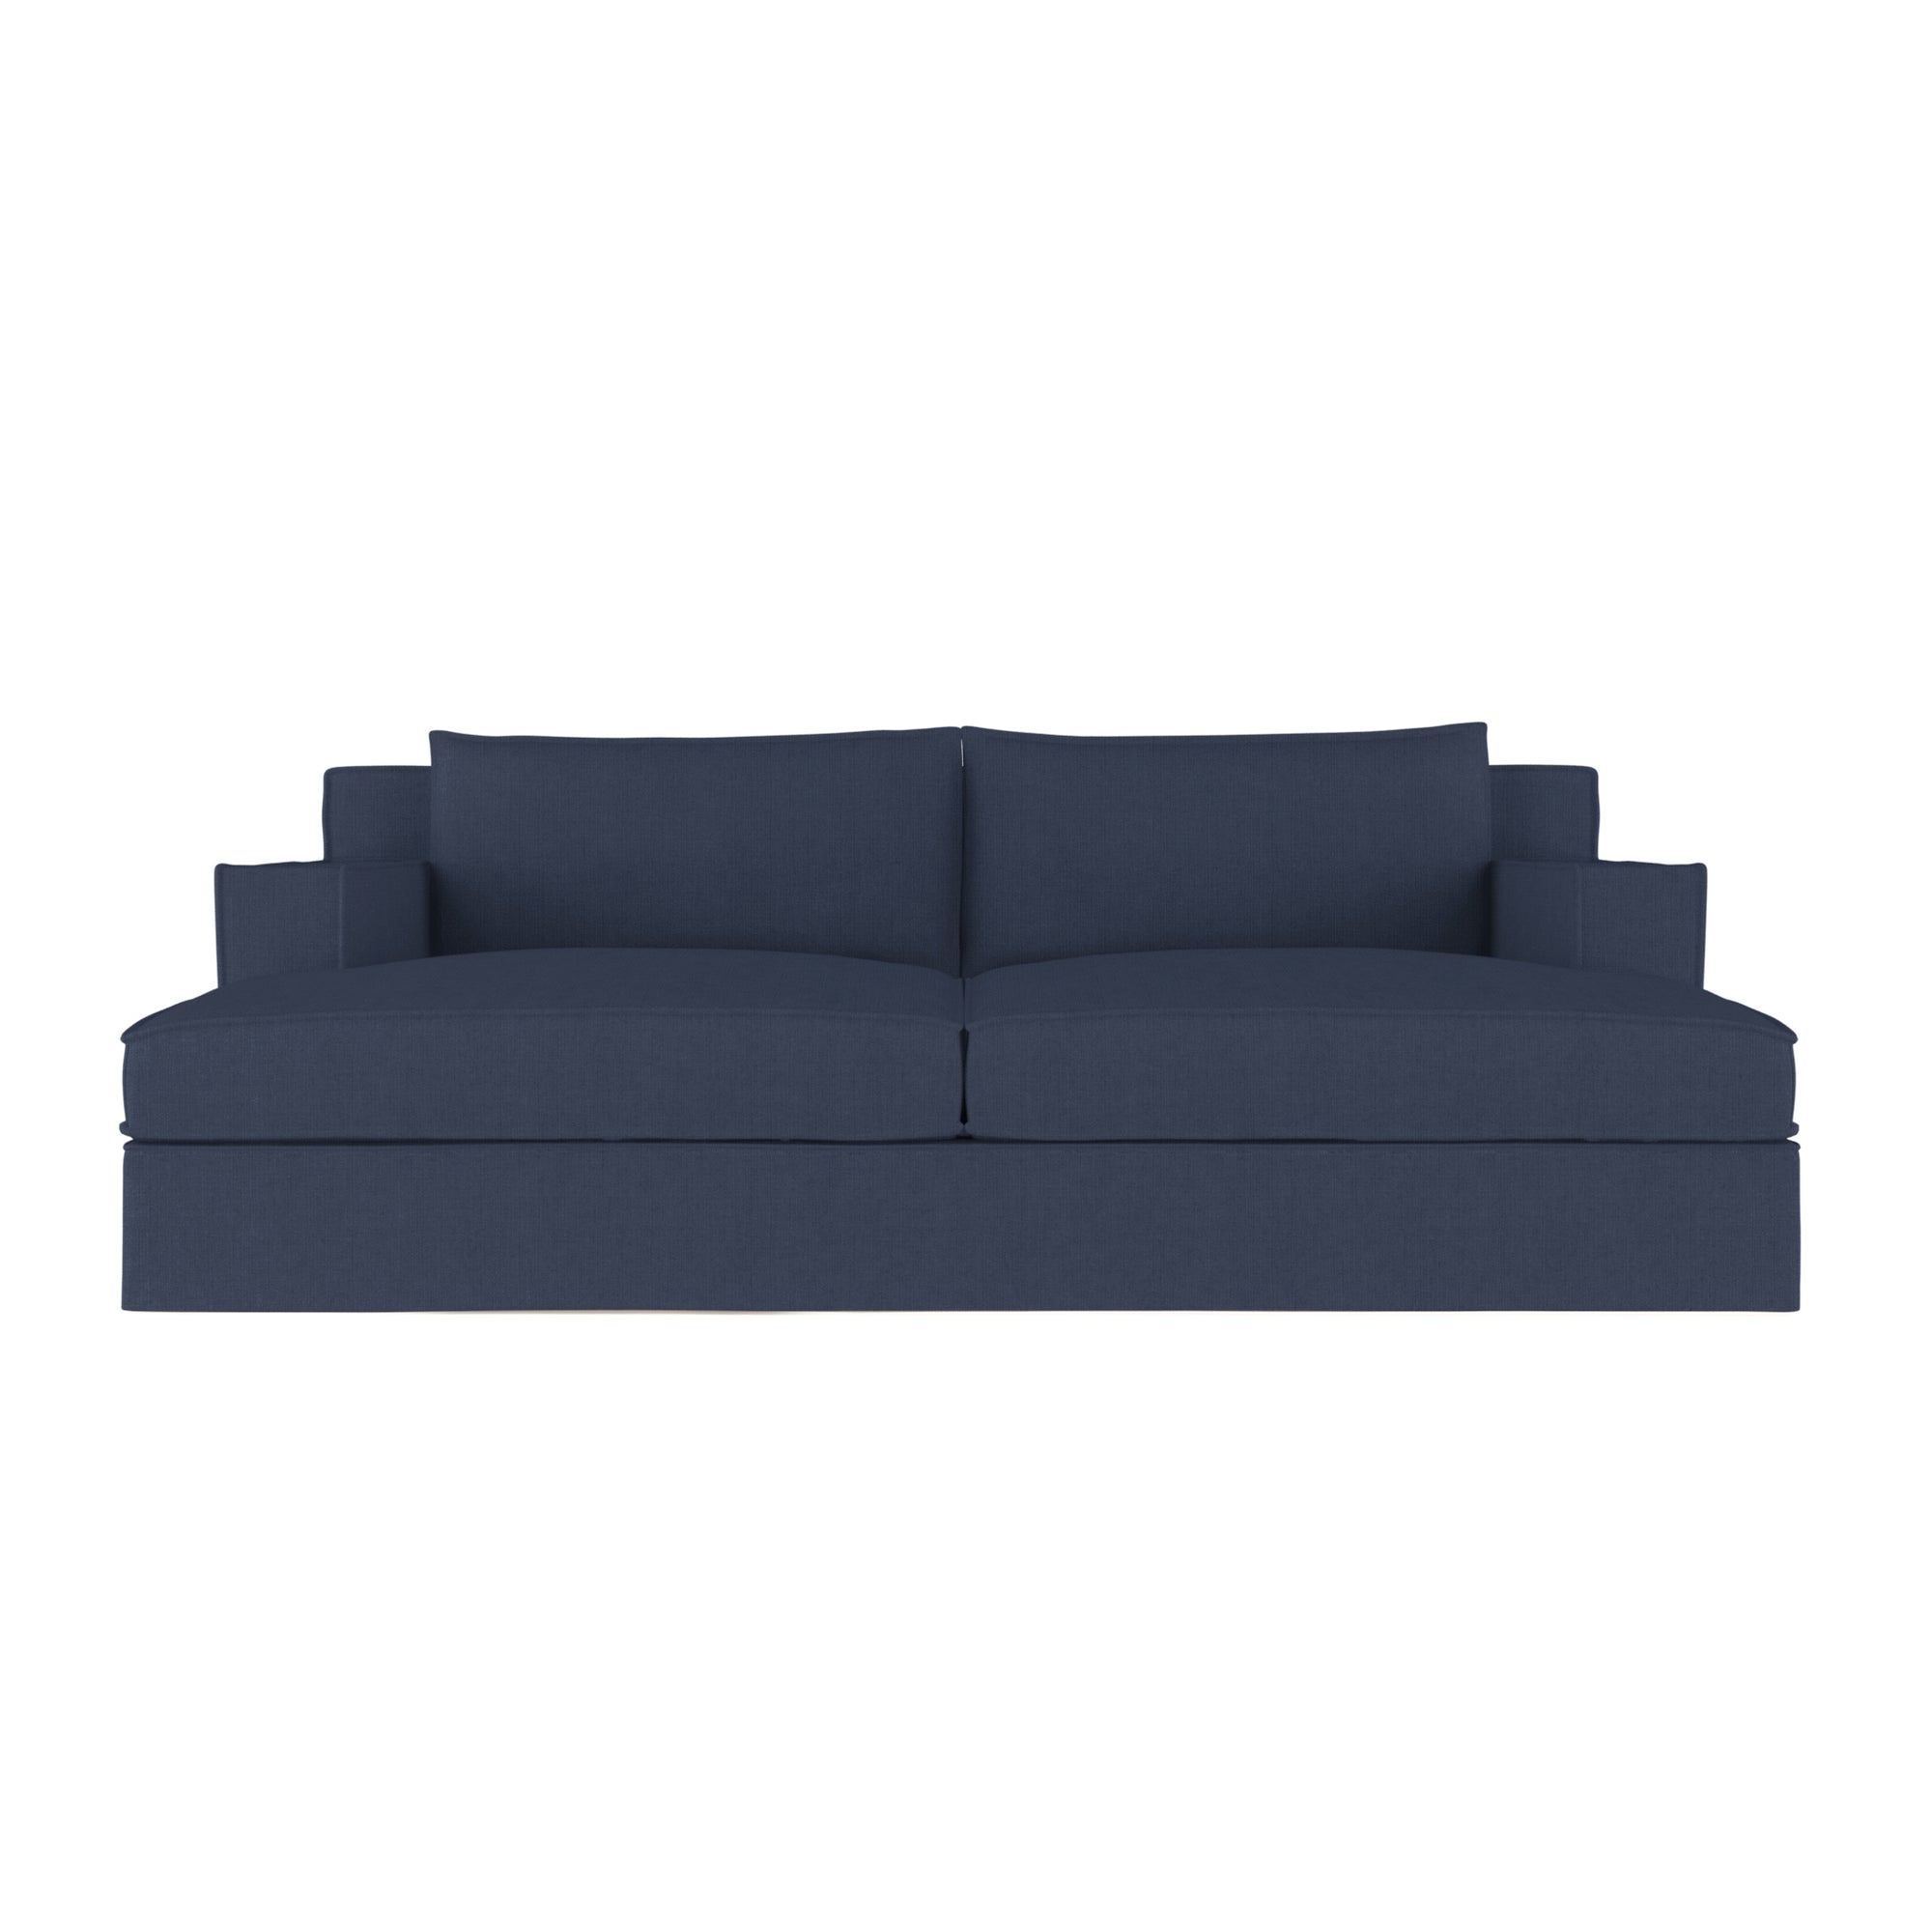 Mulberry Daybed - Blue Print Box Weave Linen